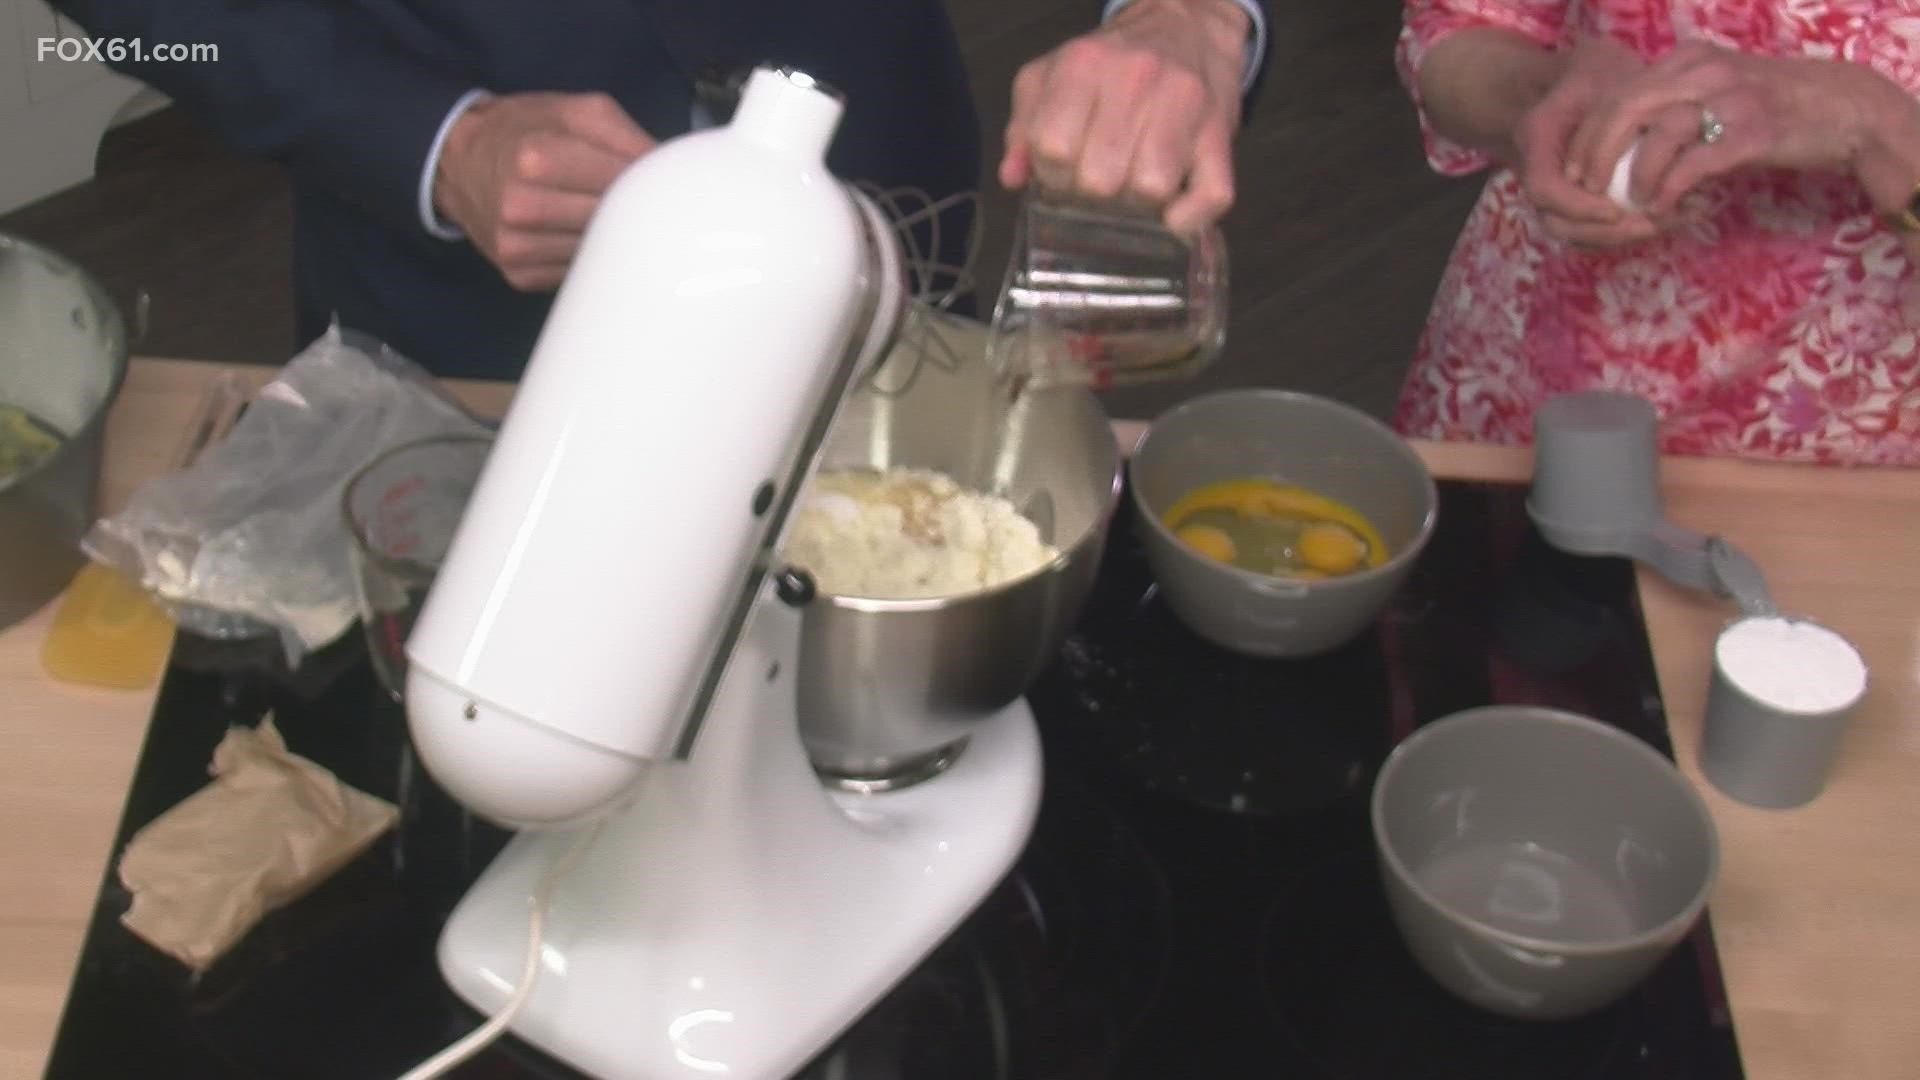 FOX61's Keith McGilvery and his mom, Jane, are sharing a family recipe for a glazed, lemon-orange cake, a spring treat, perfect for celebrating mom!